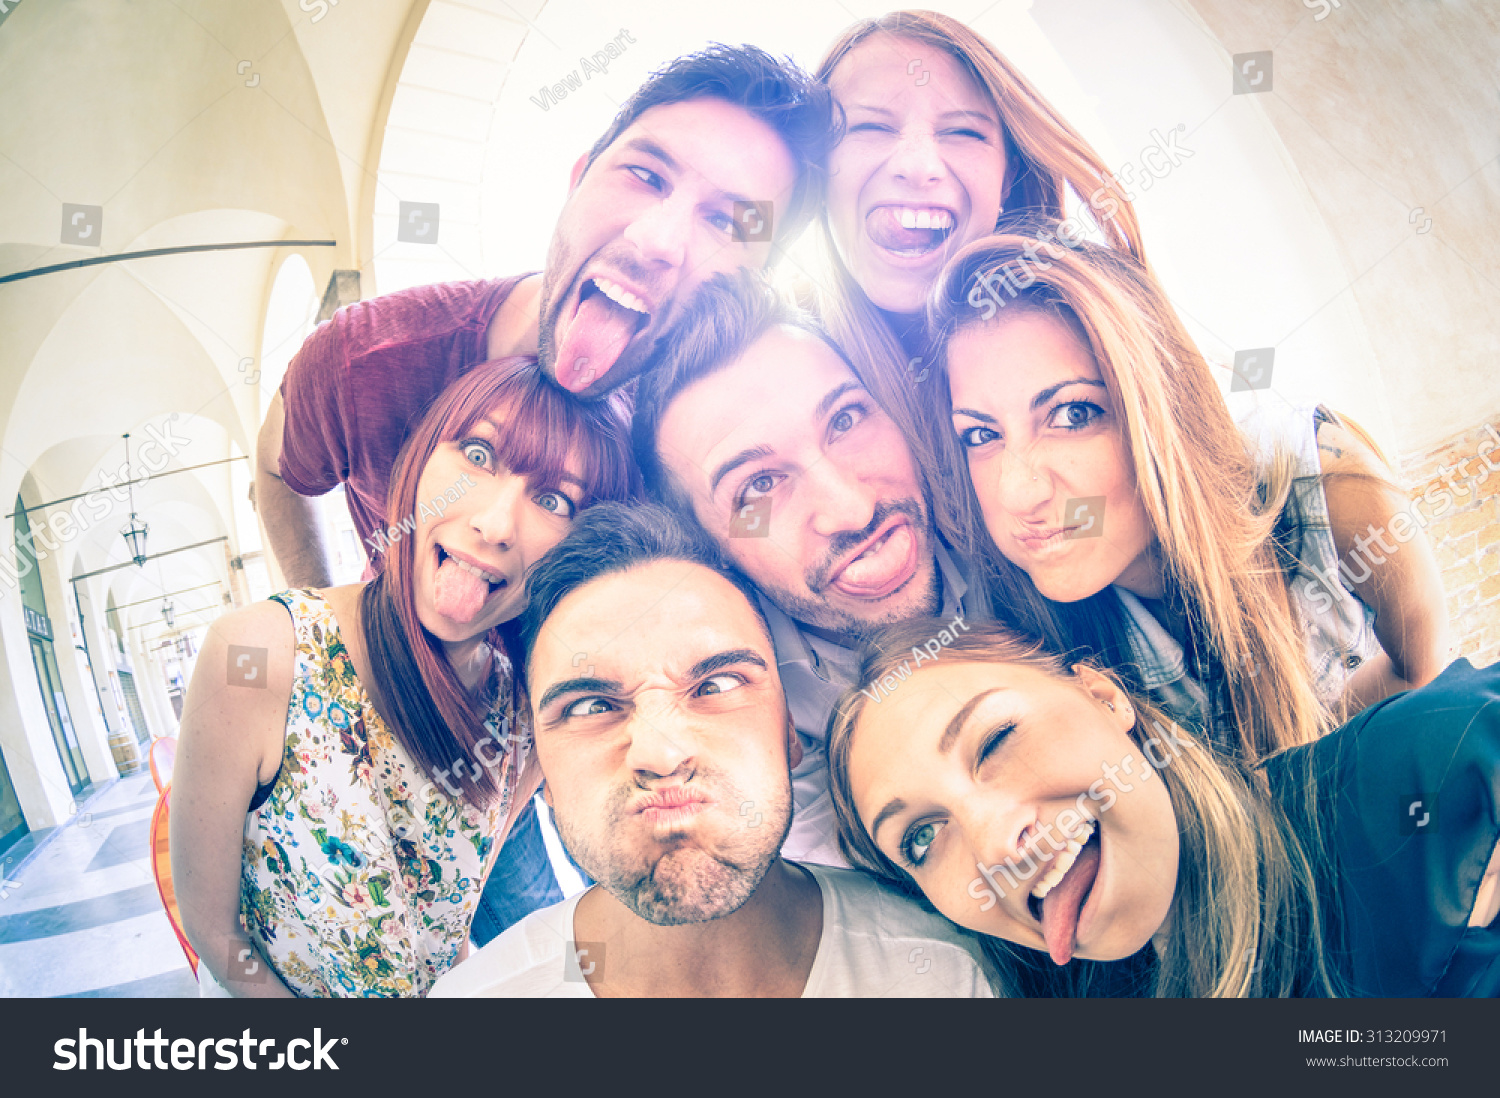 Best friends taking selfie outdoors with backlighting - Happy friendship concept with young people having fun together - Cold vintage filtered look with soft focus on faces due to sunshine halo flare #313209971